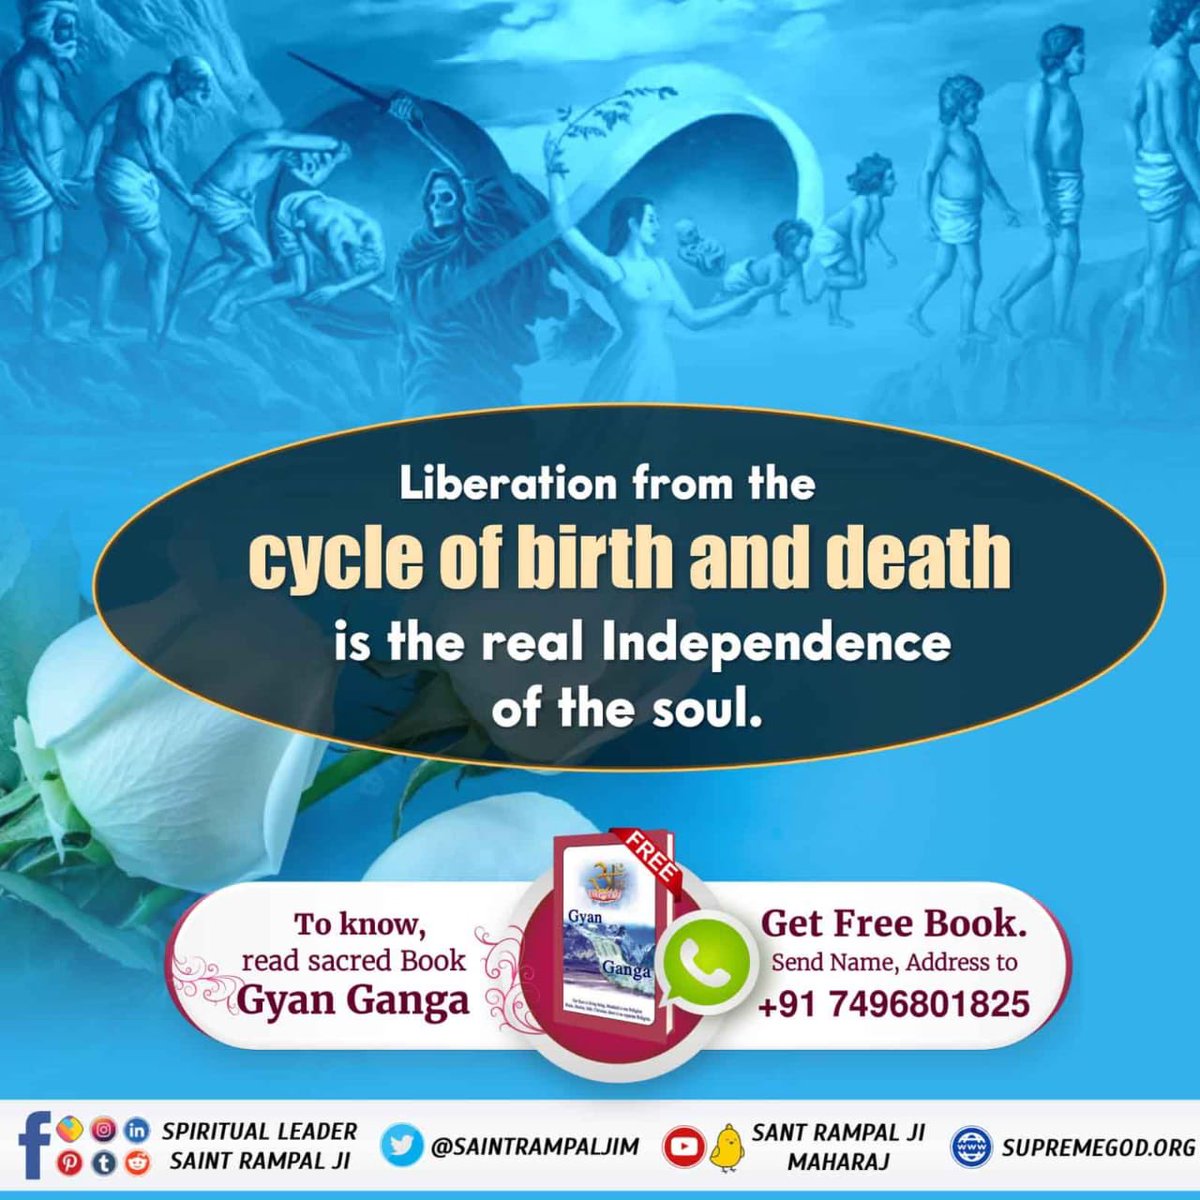 #GodMorningFriday Liberation from the Cycle of birth and death is the real Independence of the soul. To know more must read the previous book 'Gyan Ganga'' Visit Saint Rampal Ji Maharaj YouTube Channel for More Information #fridaymorning